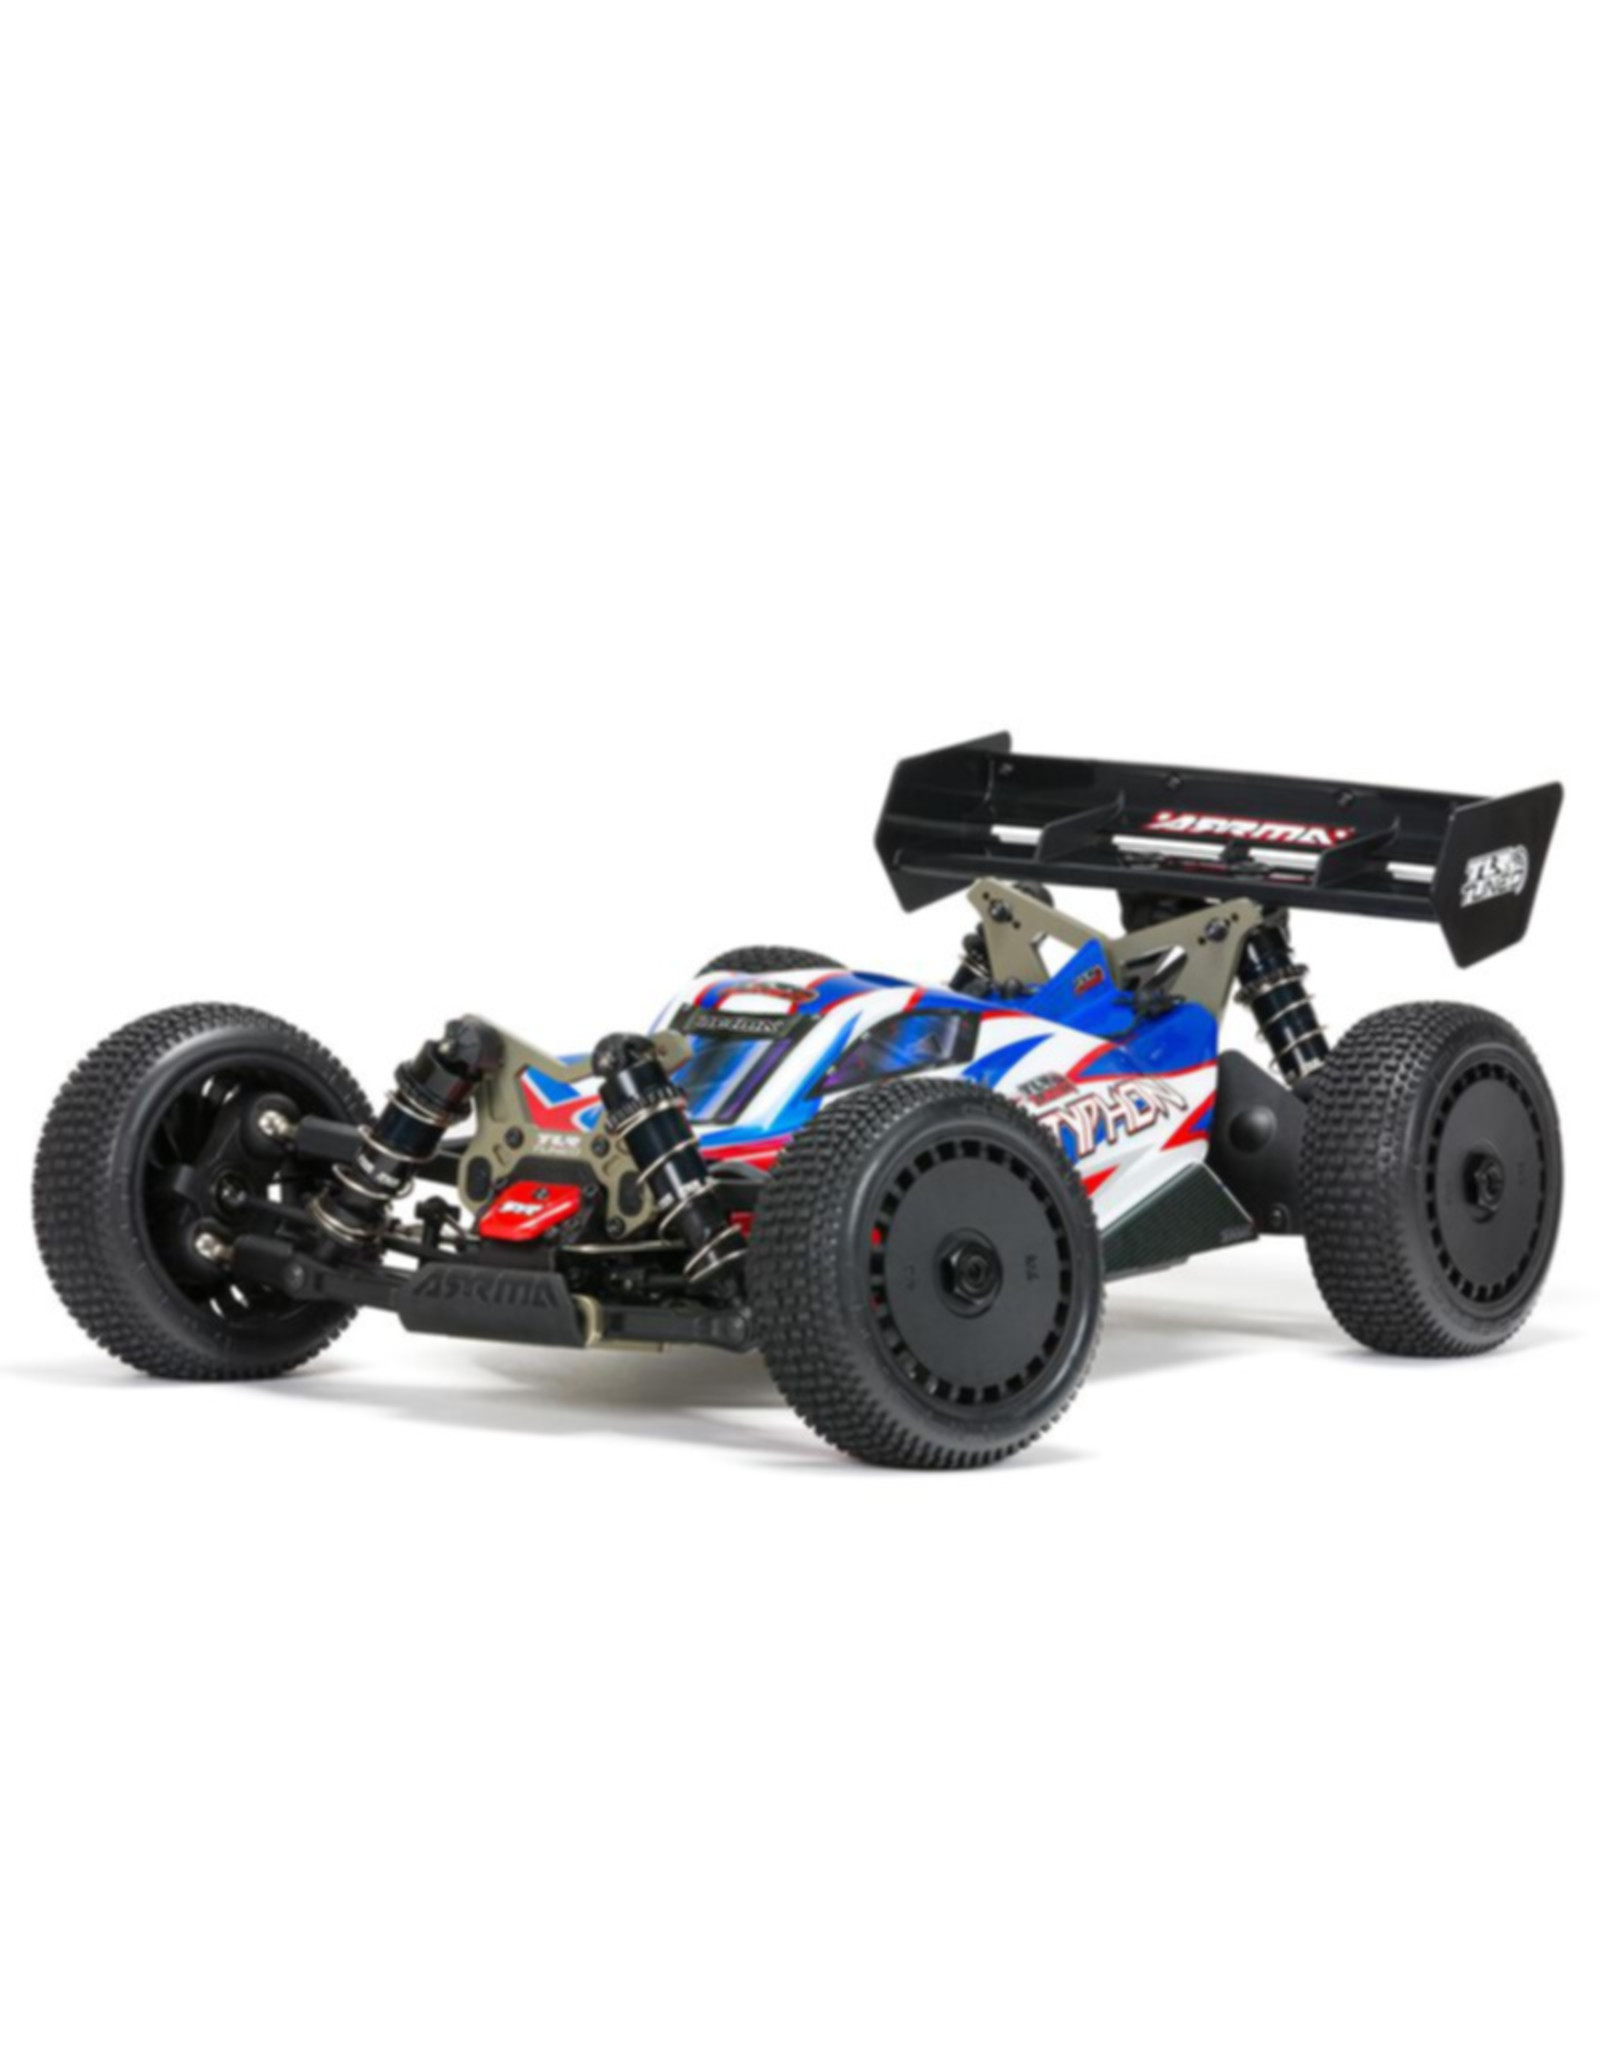 Arrma ARA8406 TLR Tuned TYPHON 6S 4WD BLX 1/8 Buggy RTR Red/Blue